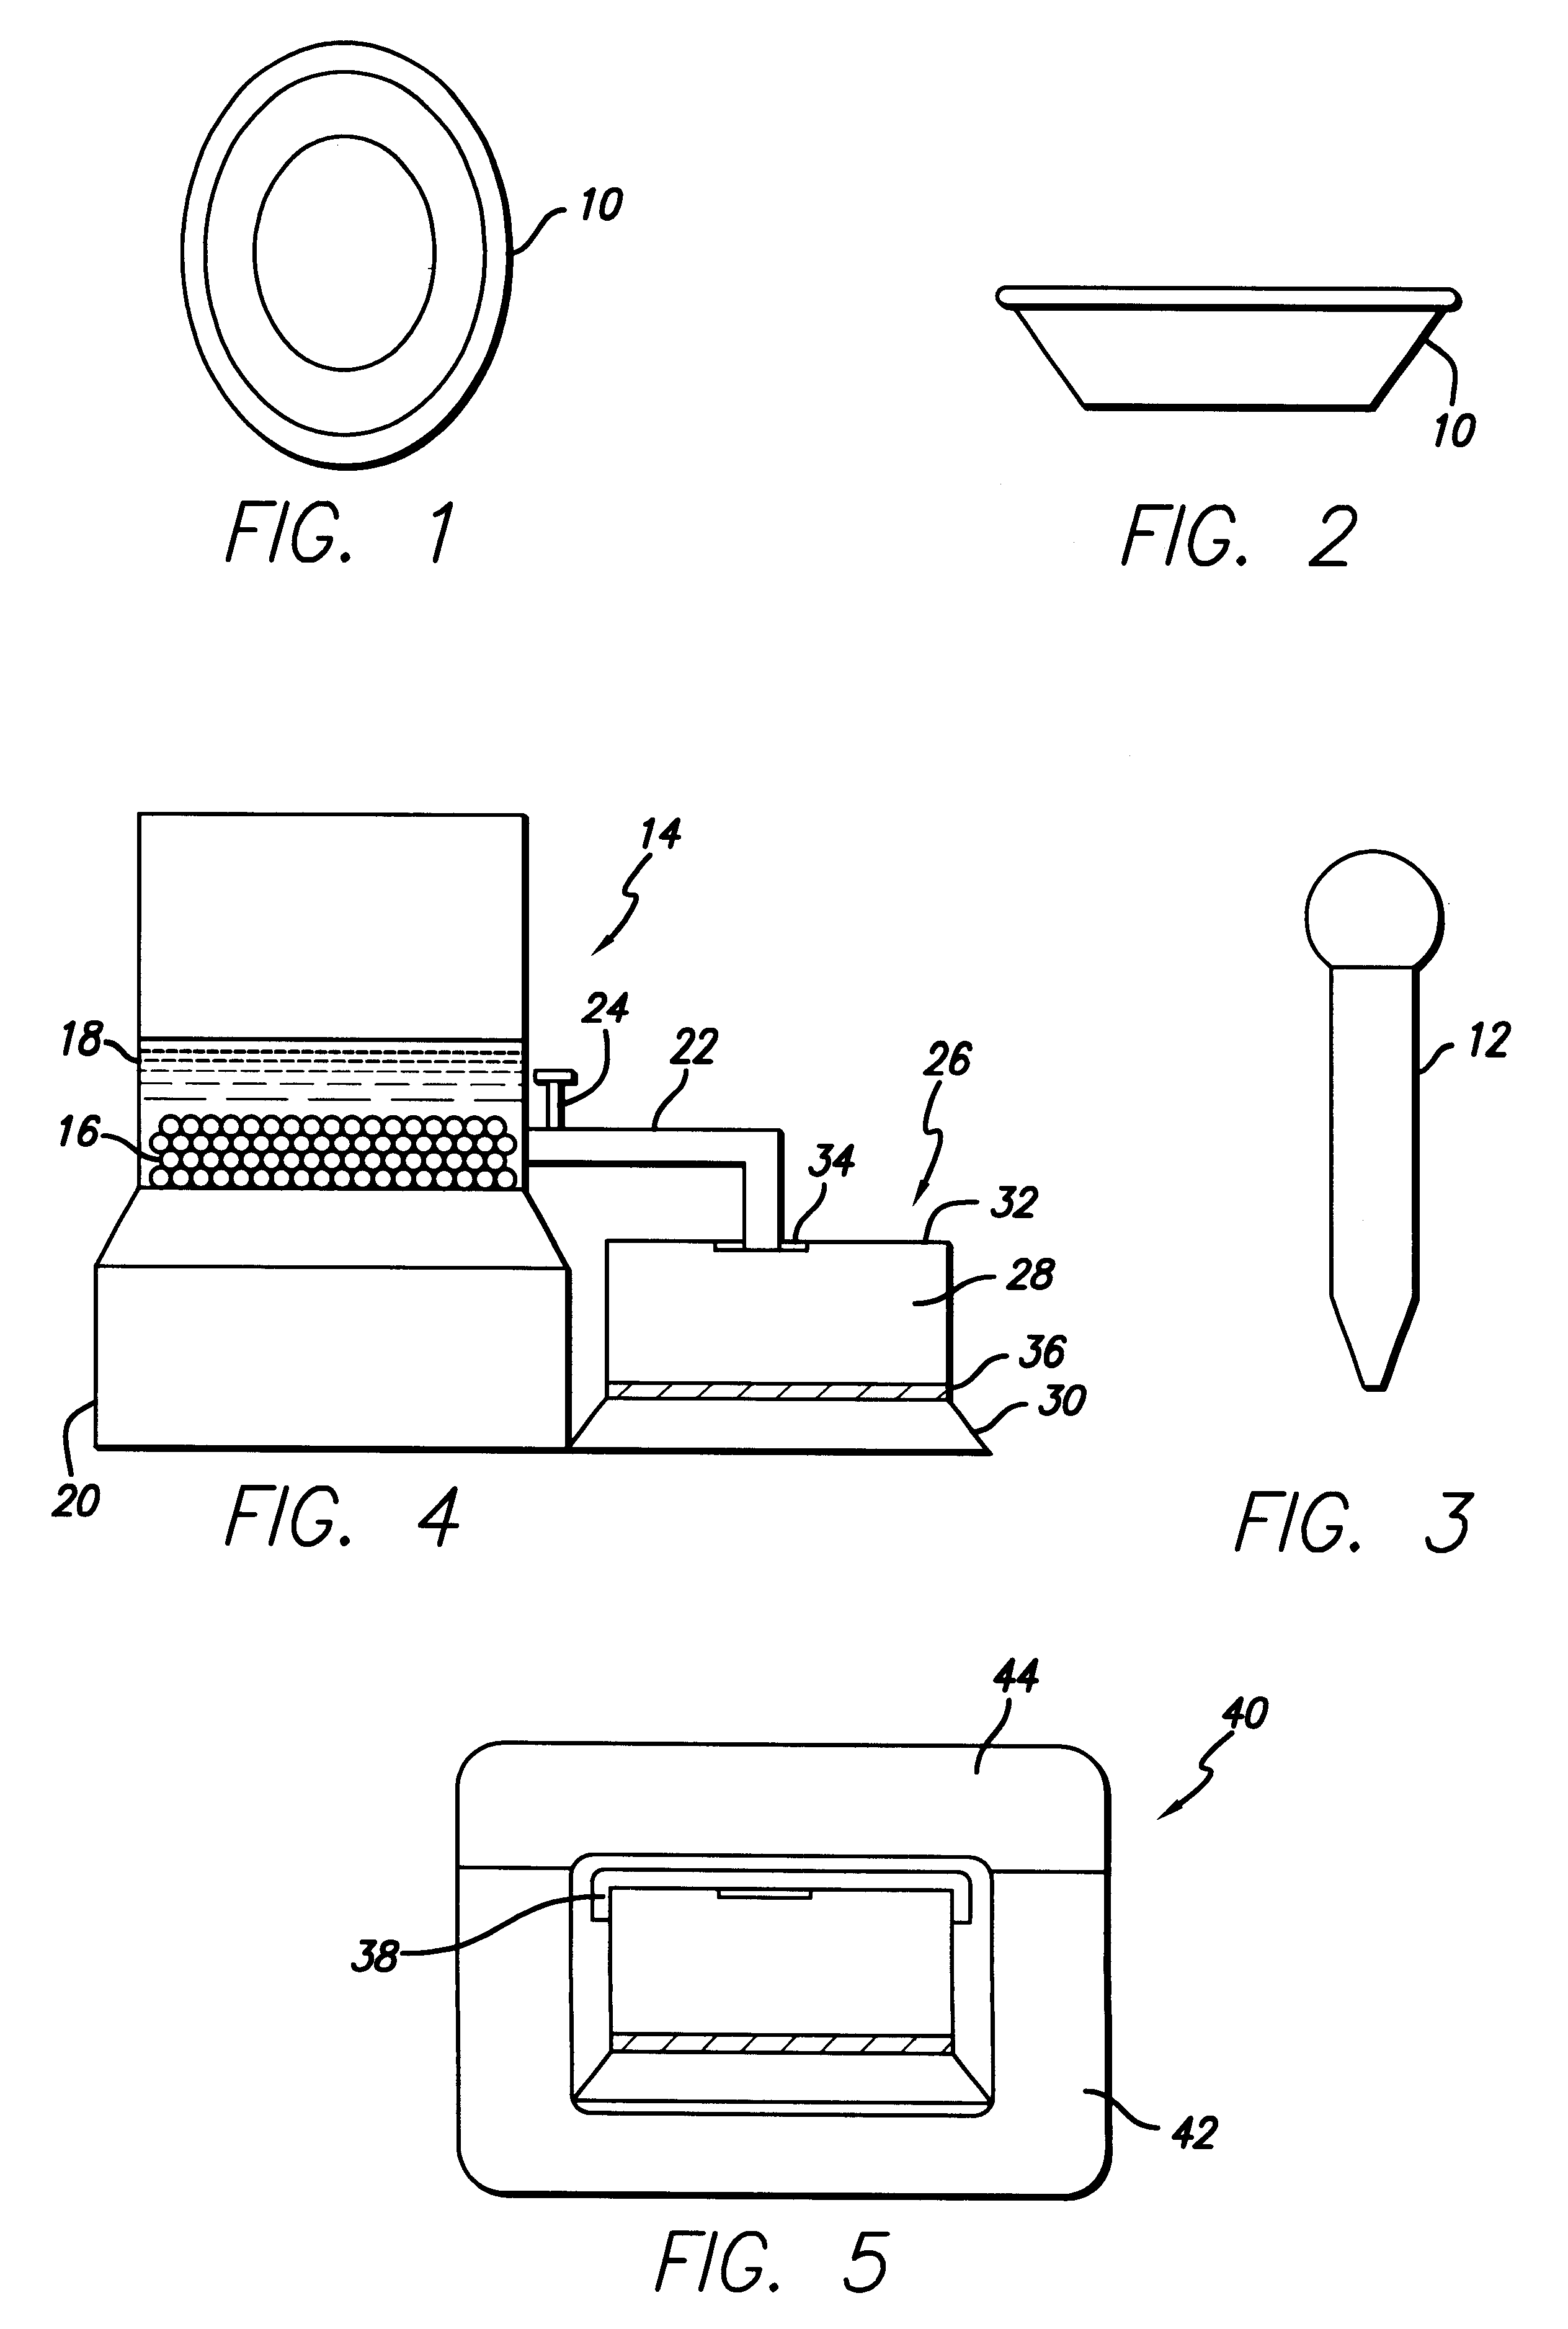 Method and system for production and collection of lavage induced stool (LIS) for chemical and biologic tests of cells